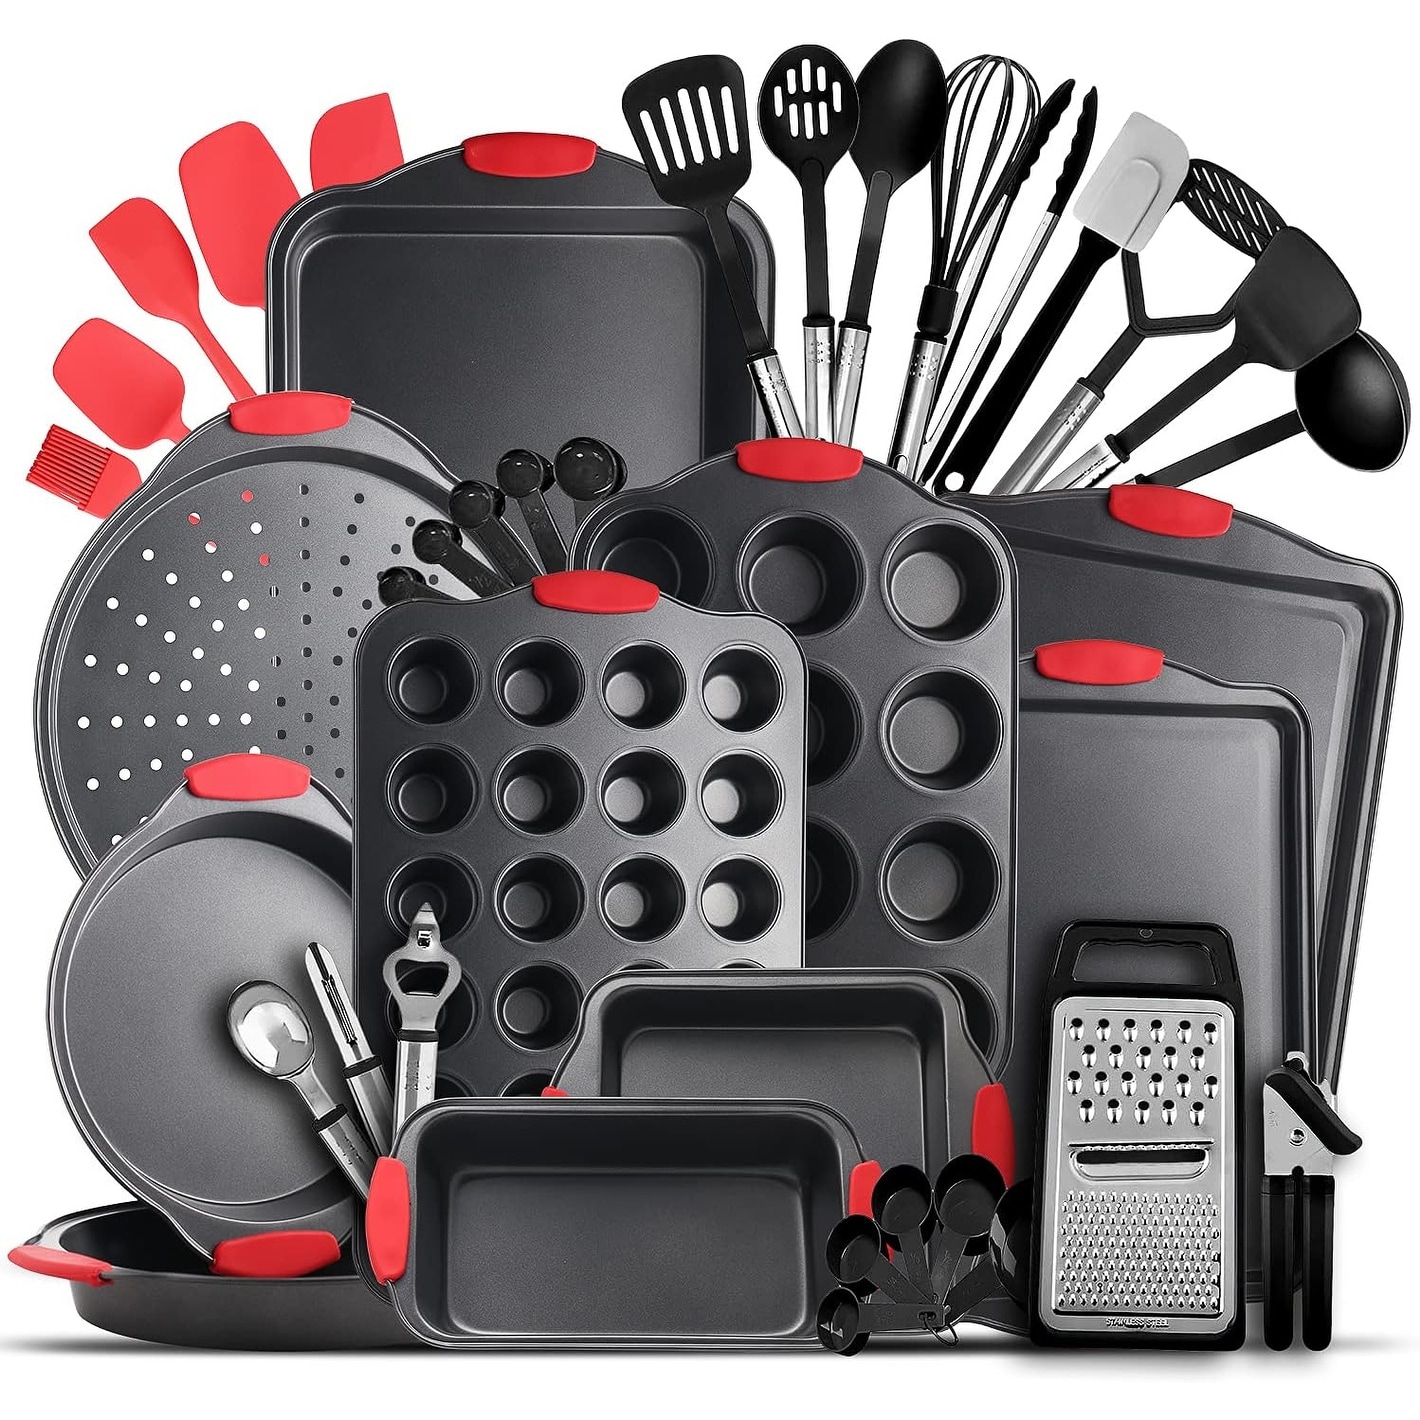 https://ak1.ostkcdn.com/images/products/is/images/direct/0cb6a5d0a78dae8250d78ea0bcd83b9e9ed4fd4c/39-Piece-Nonstick-Bakeware-Sets.jpg